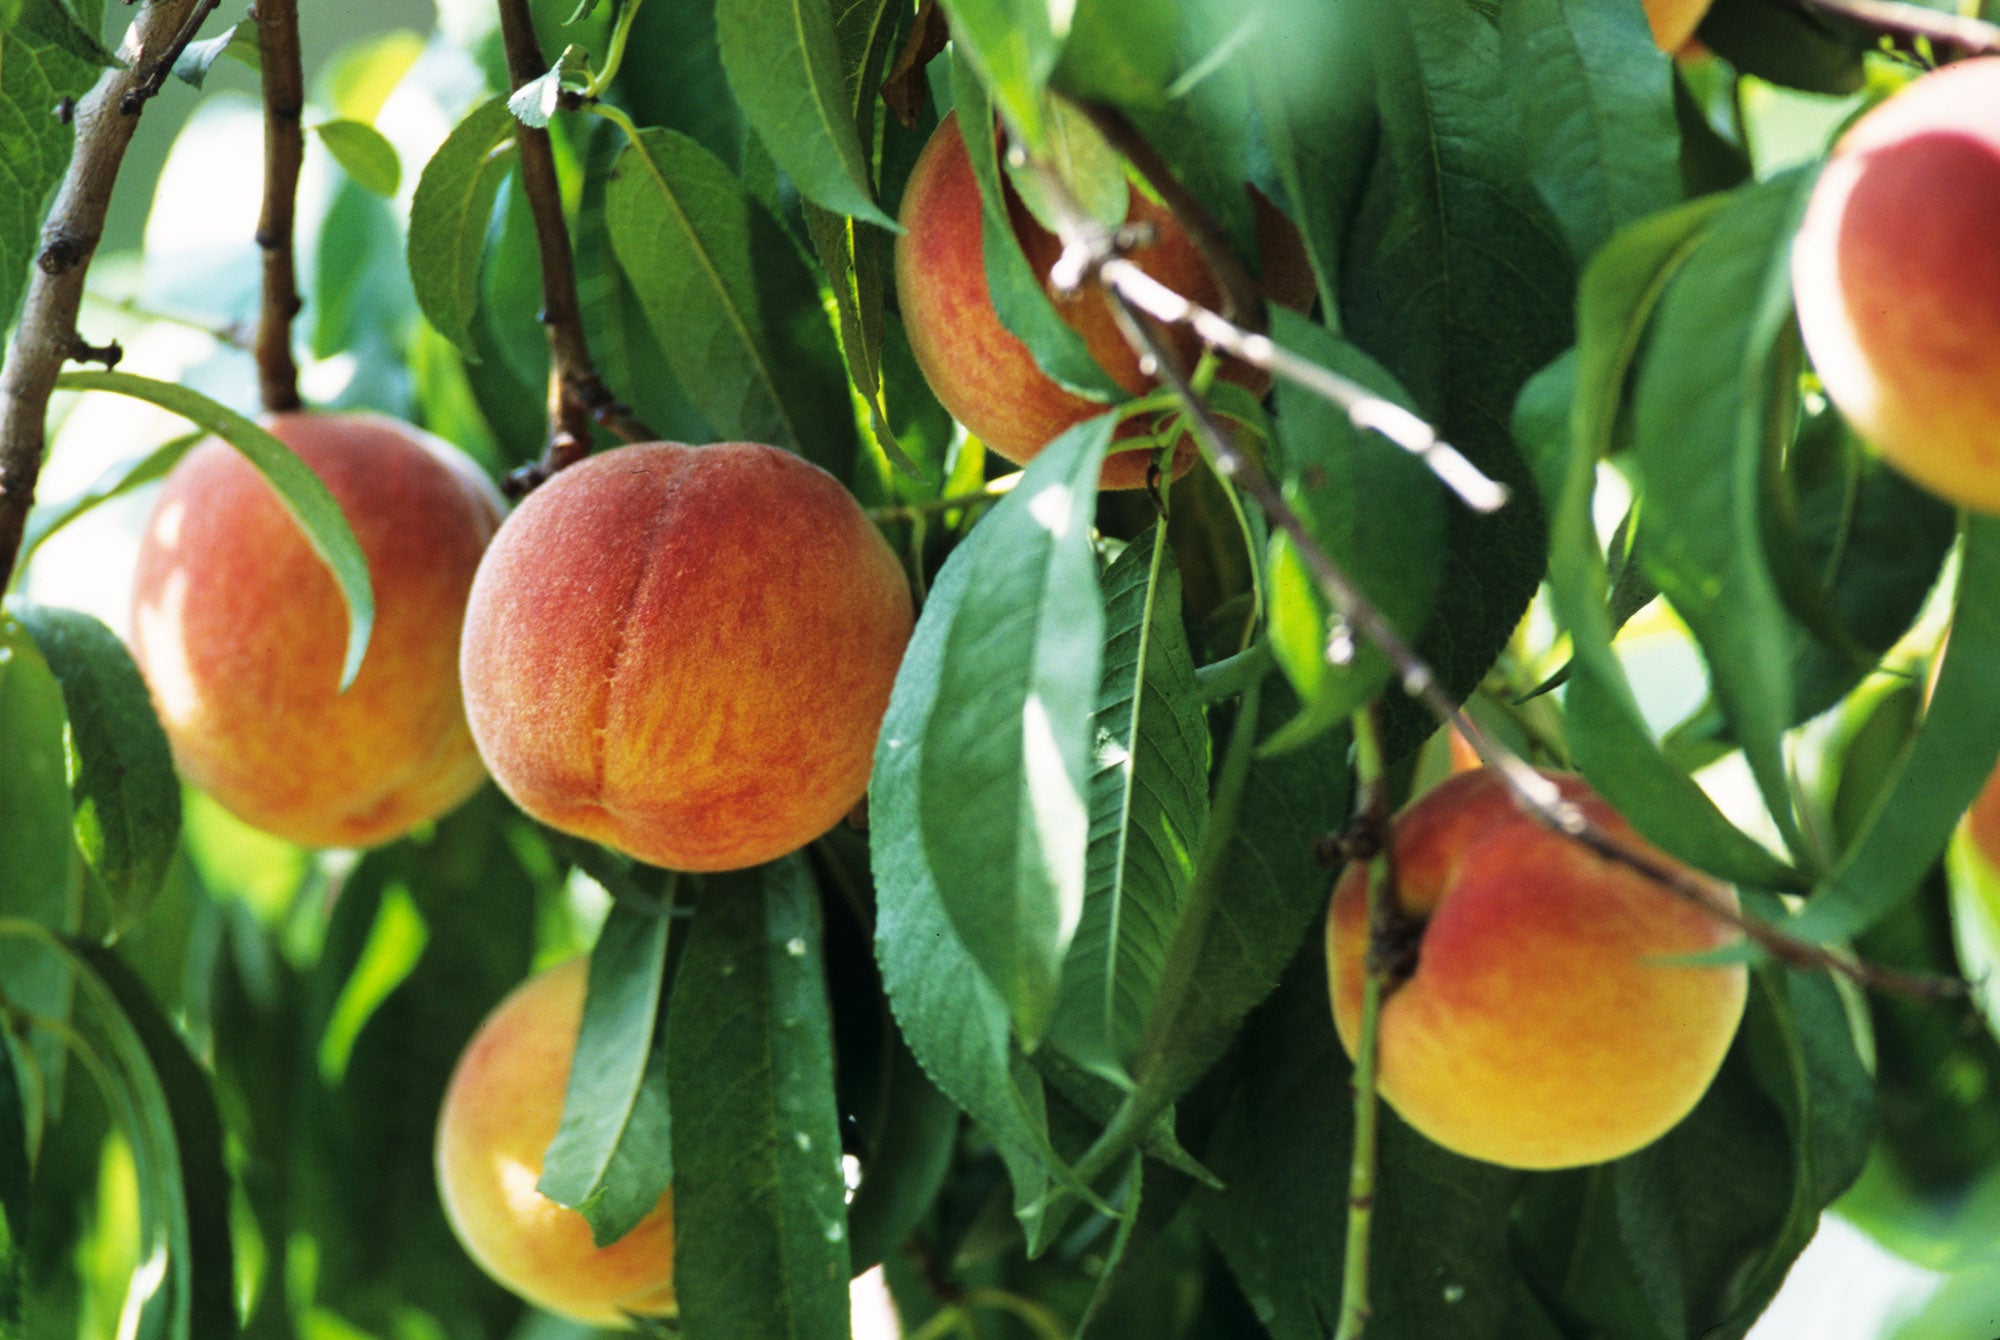 Ripe peaches hang on a peach tree, surrounded by leaves.